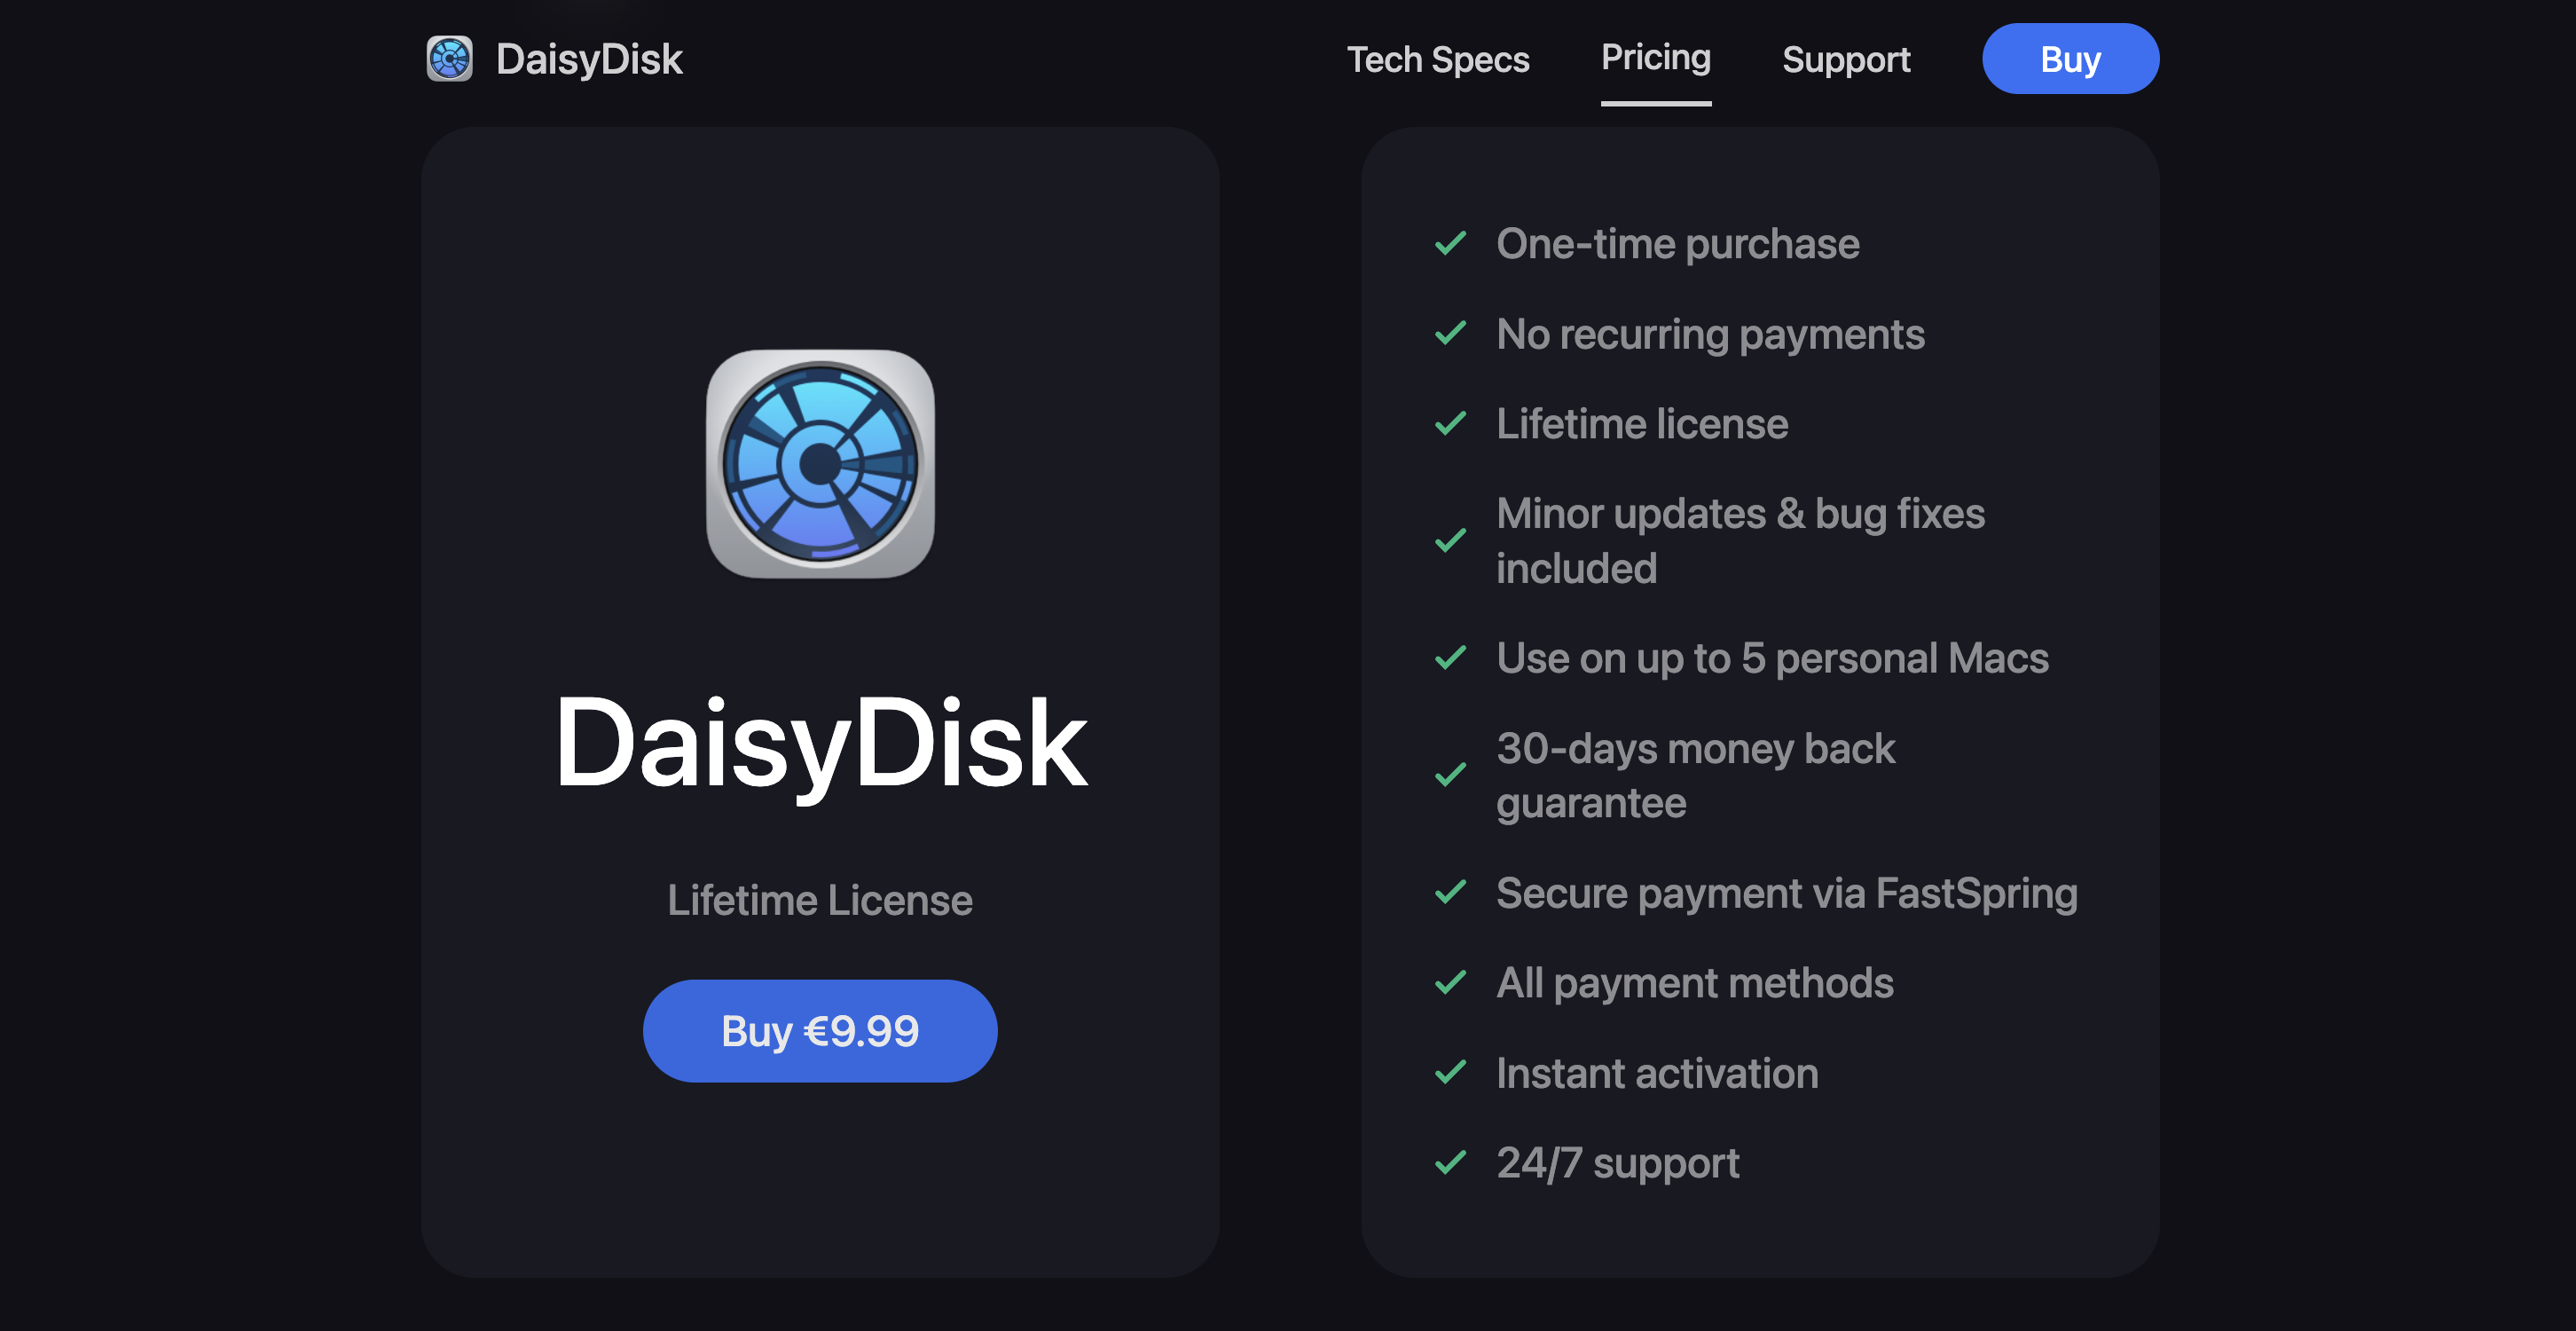 Daisy Disk Pricing